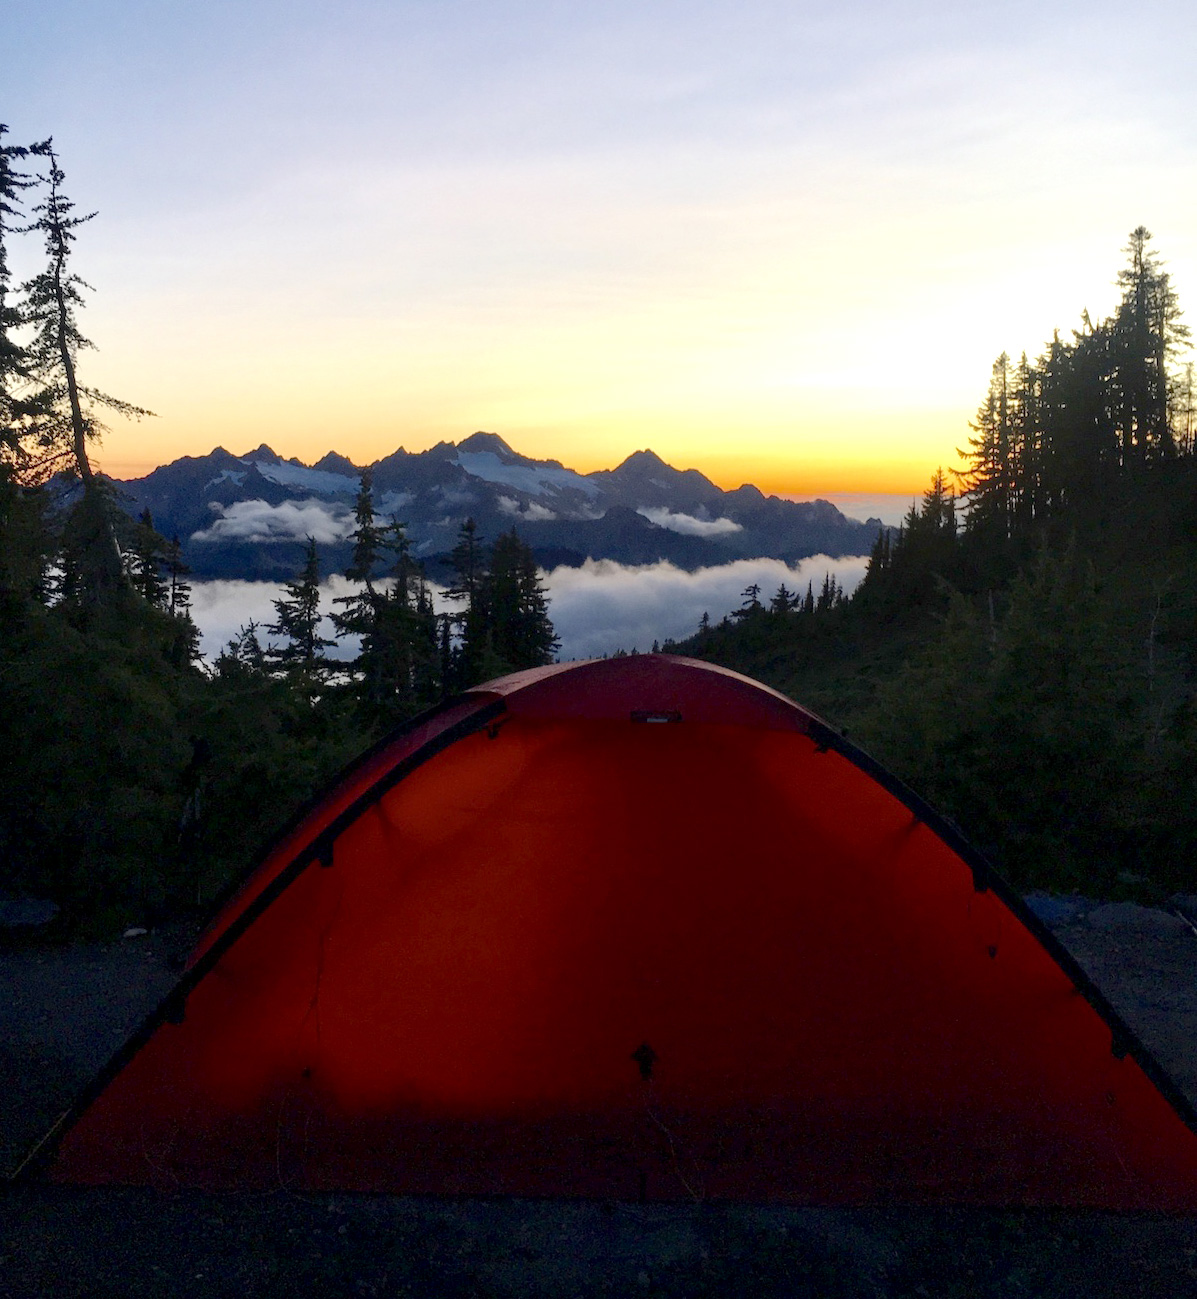 A sunset view of the North Cascades in Washington from the author's tent, September 2017. [Photo] Ana Beatriz Cholo collection